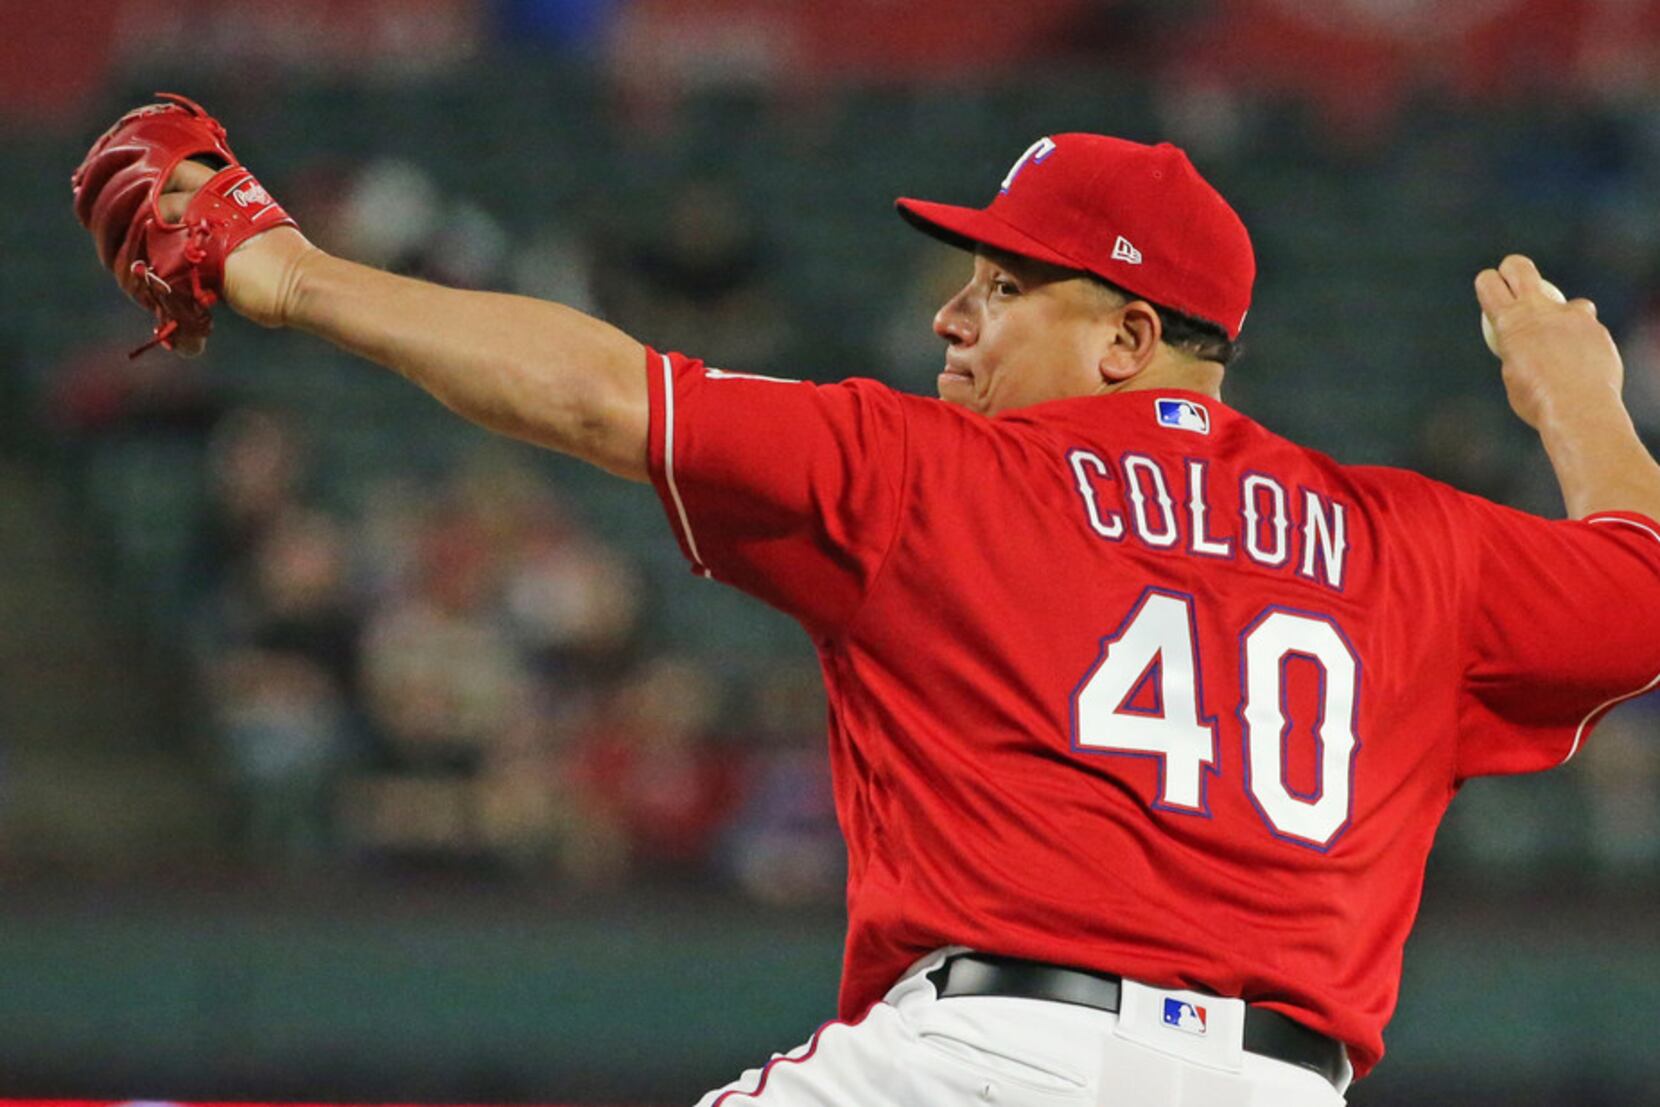 Yankees pitcher Bartolo Colon could be back in time to face Mets